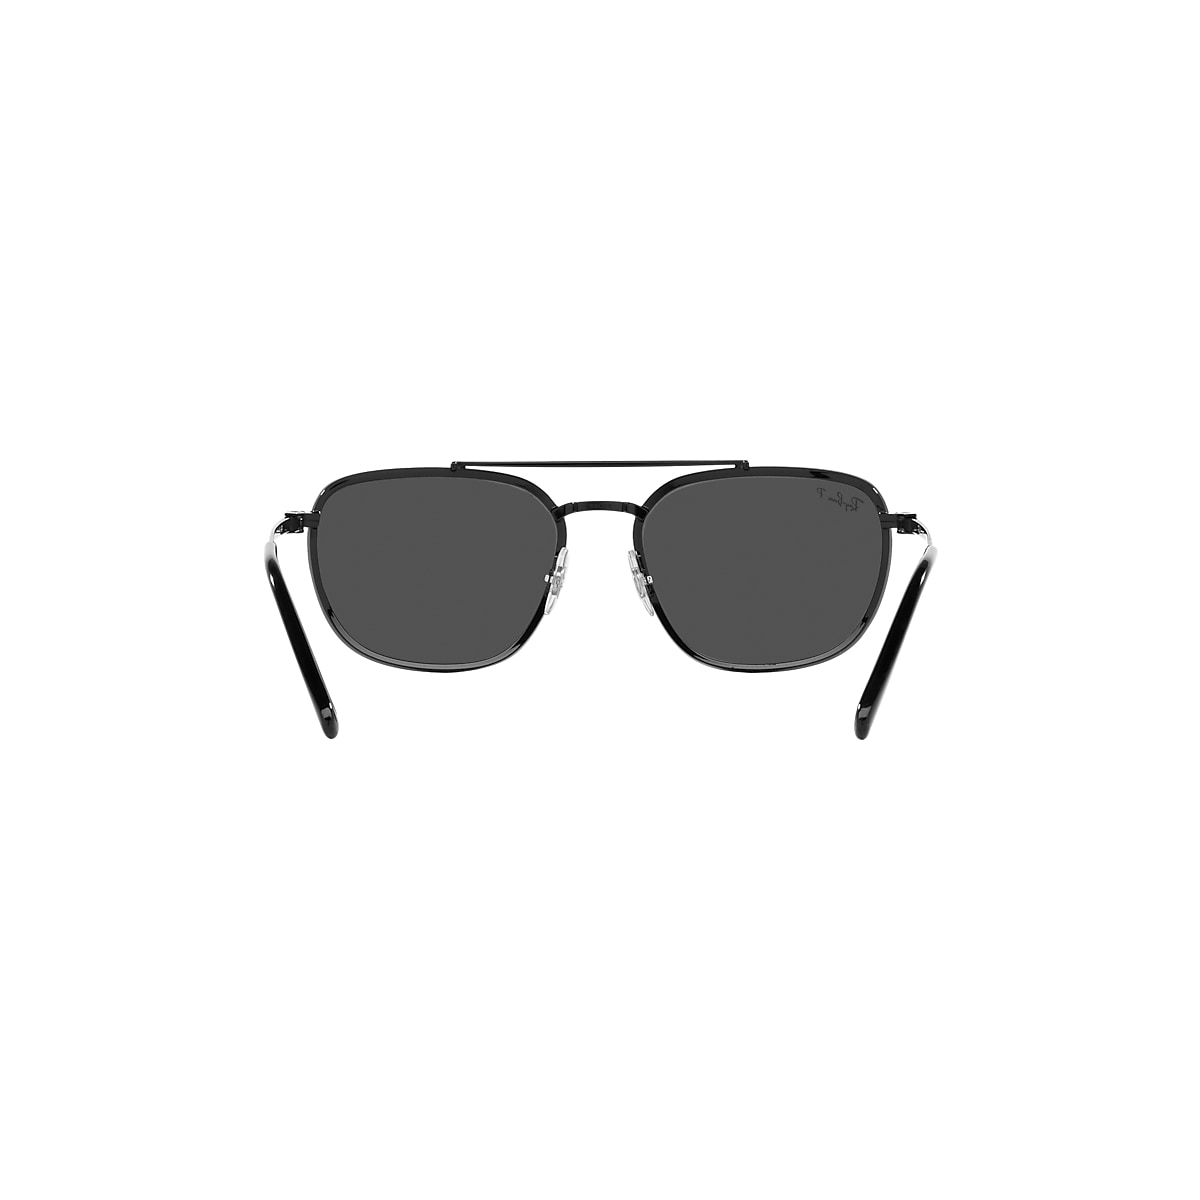 RB3708 CHROMANCE Sunglasses in Black and Grey - RB3708 | Ray-Ban® EU